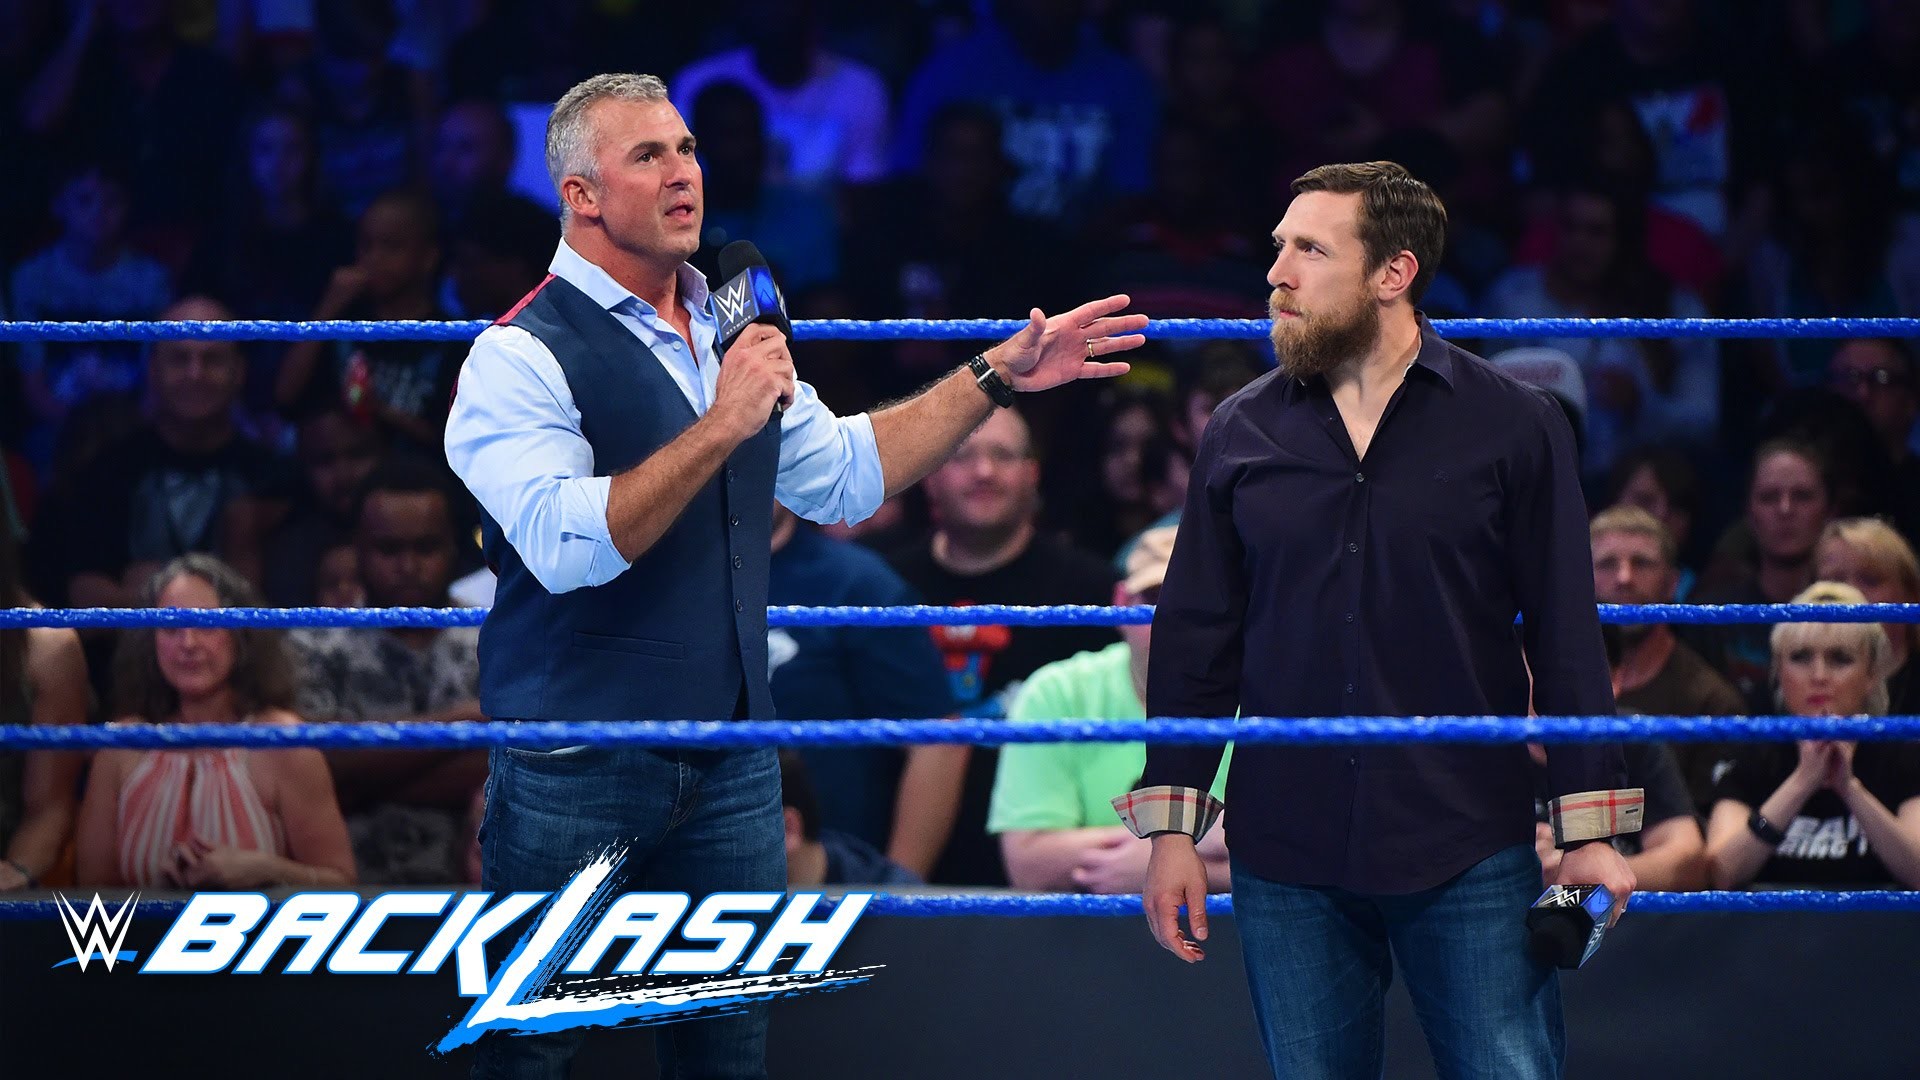 1920x1080 Shane McMahon & Daniel Bryan kick off the first SmackDown LIVE  pay-per-view: Backlash 2016 - YouTube